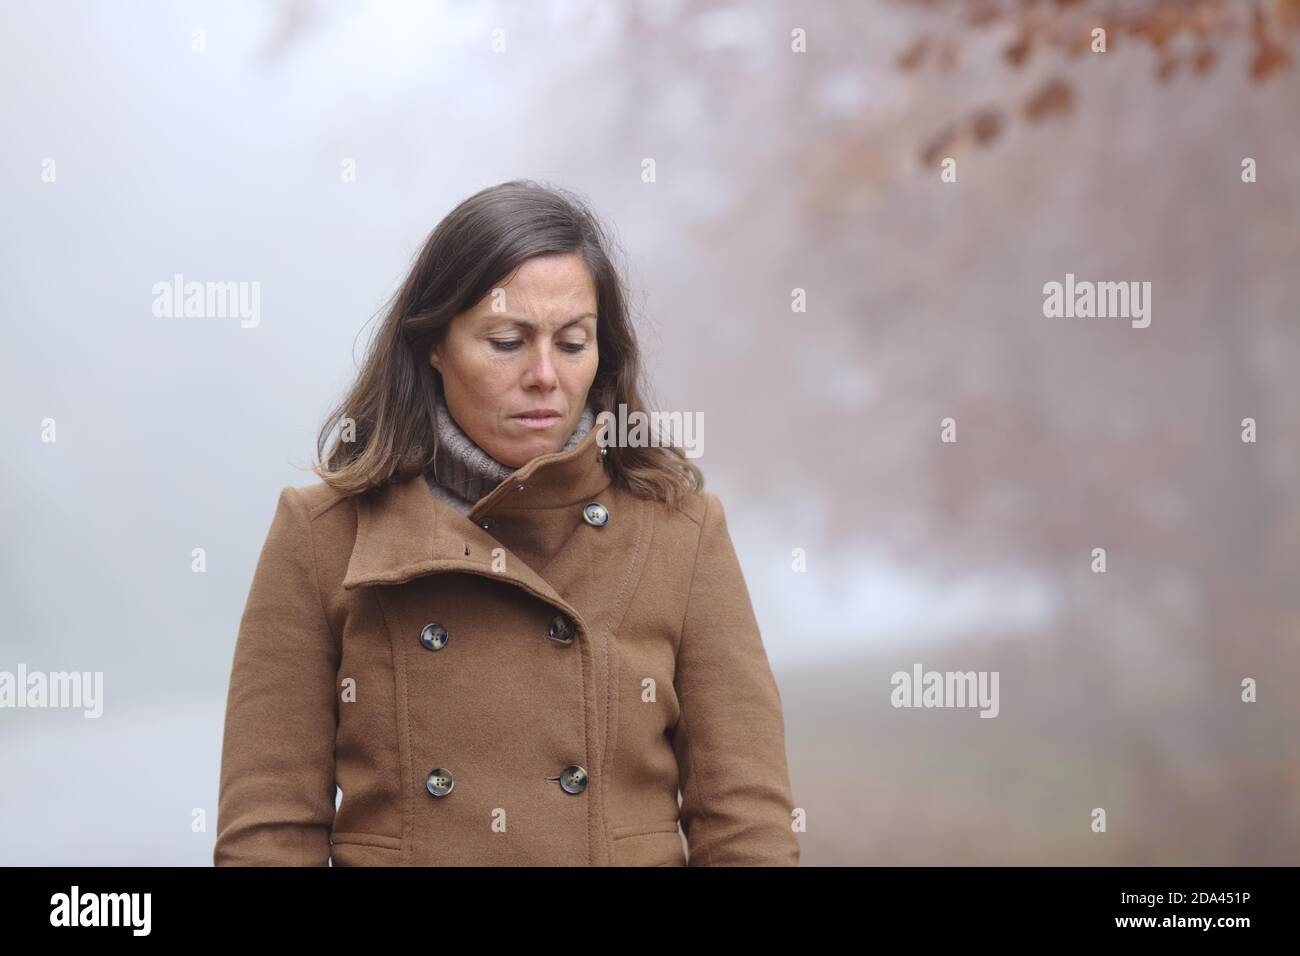 Sad middle age woman looking down walking in a forest in autumn a foggy day Stock Photo